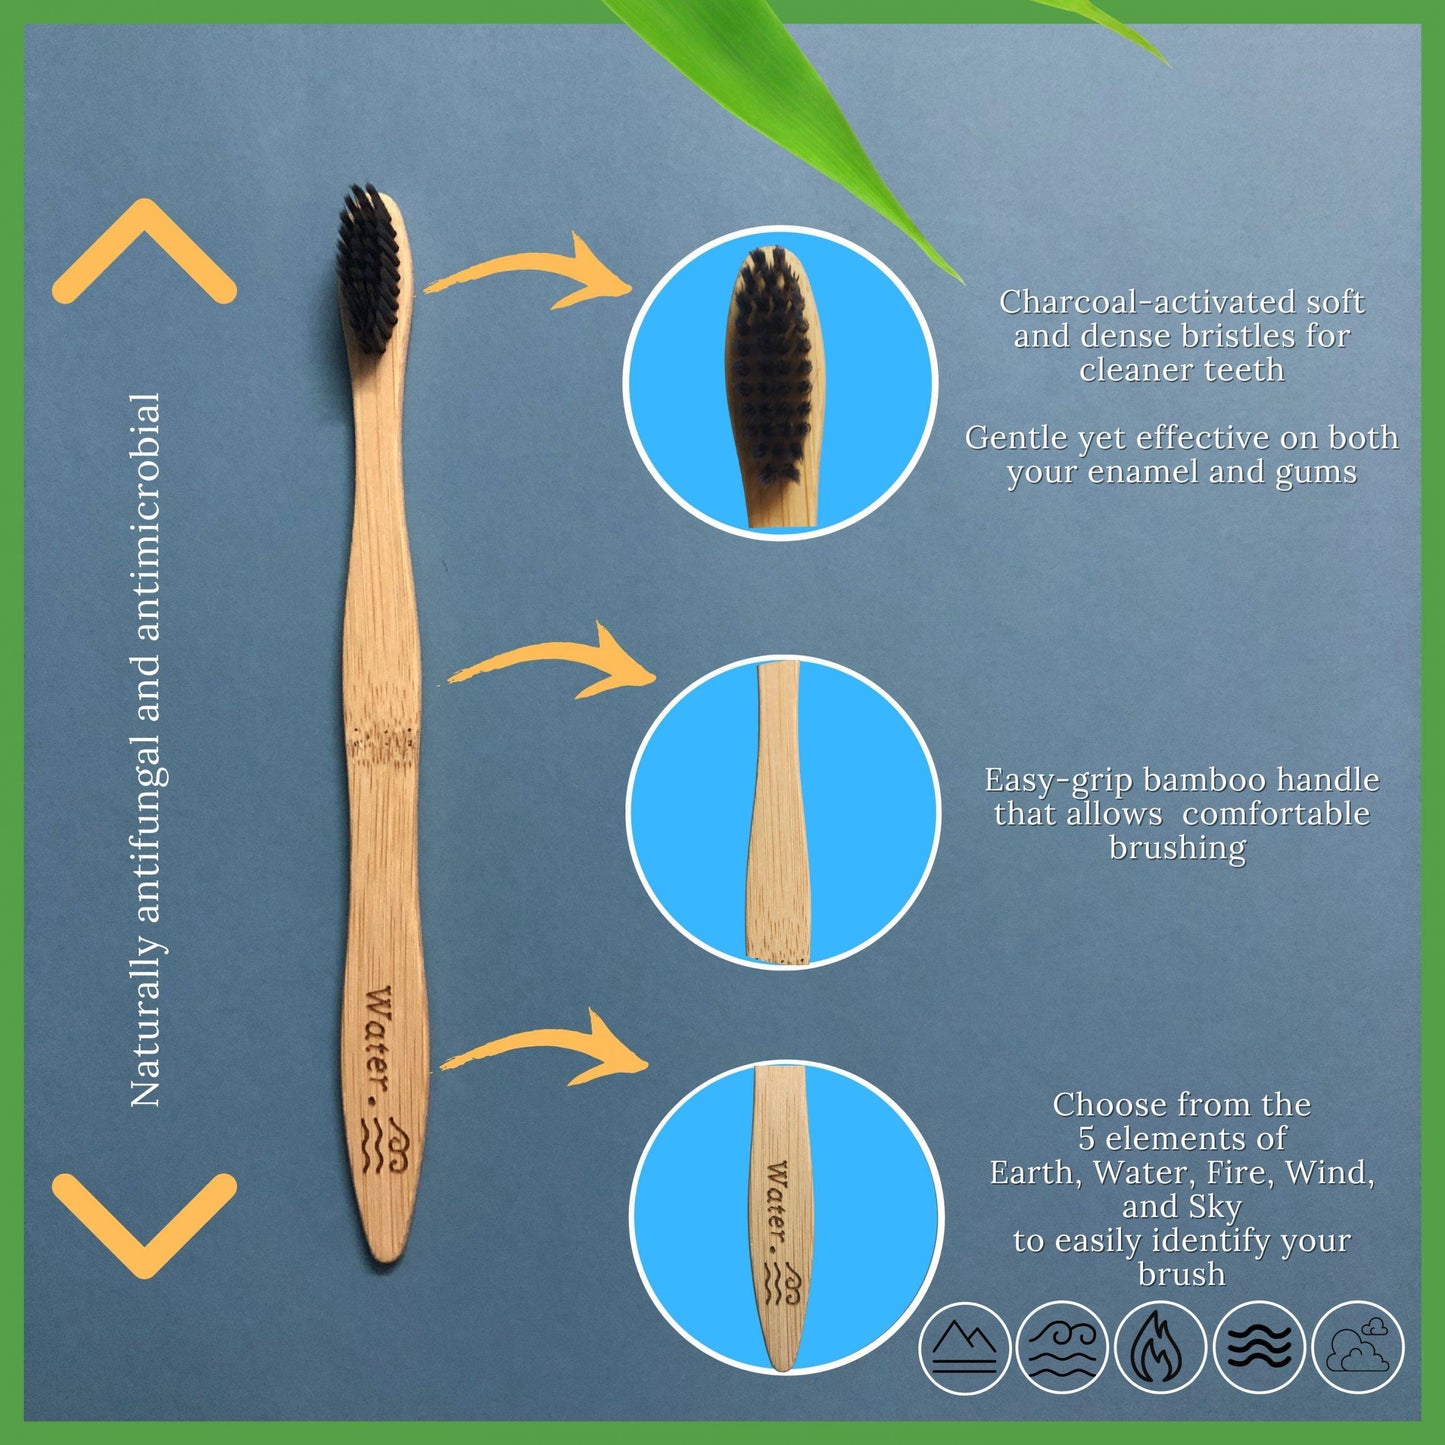 100% Biodegradable Bamboo Toothbrush with Soft Charcoal-activated Bristles - Features